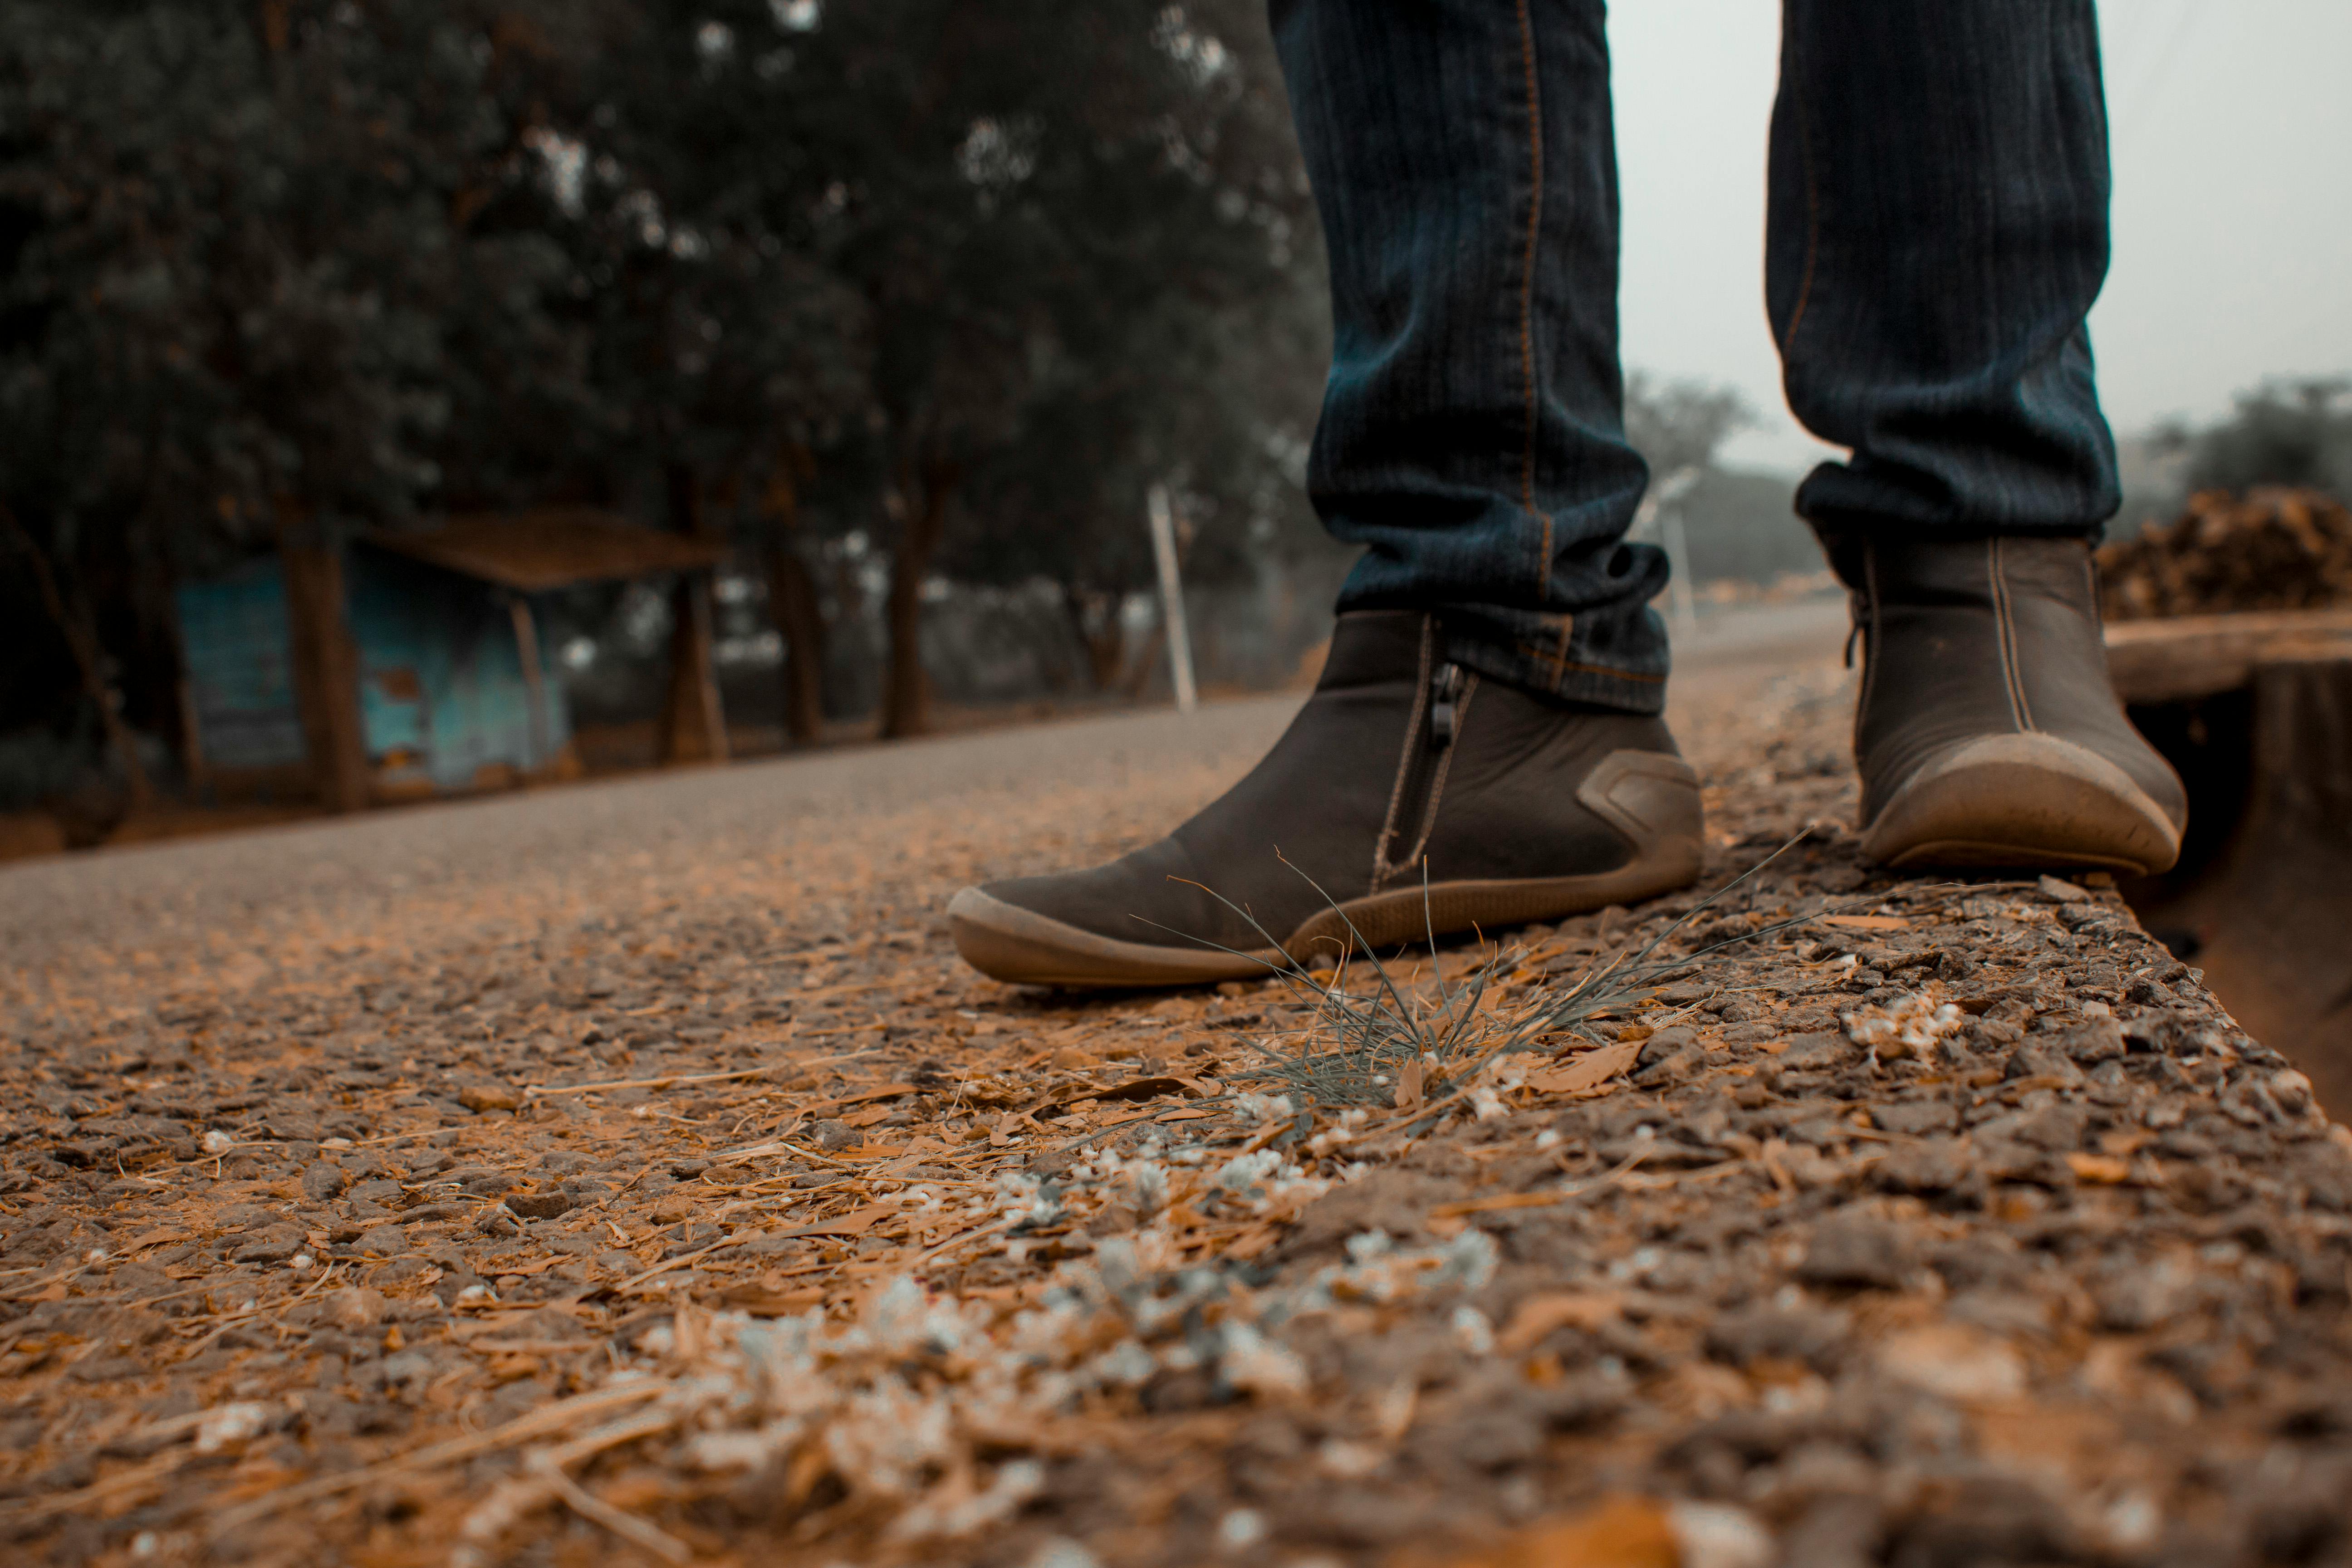 Free stock photo of curvy road, leather shoes, road